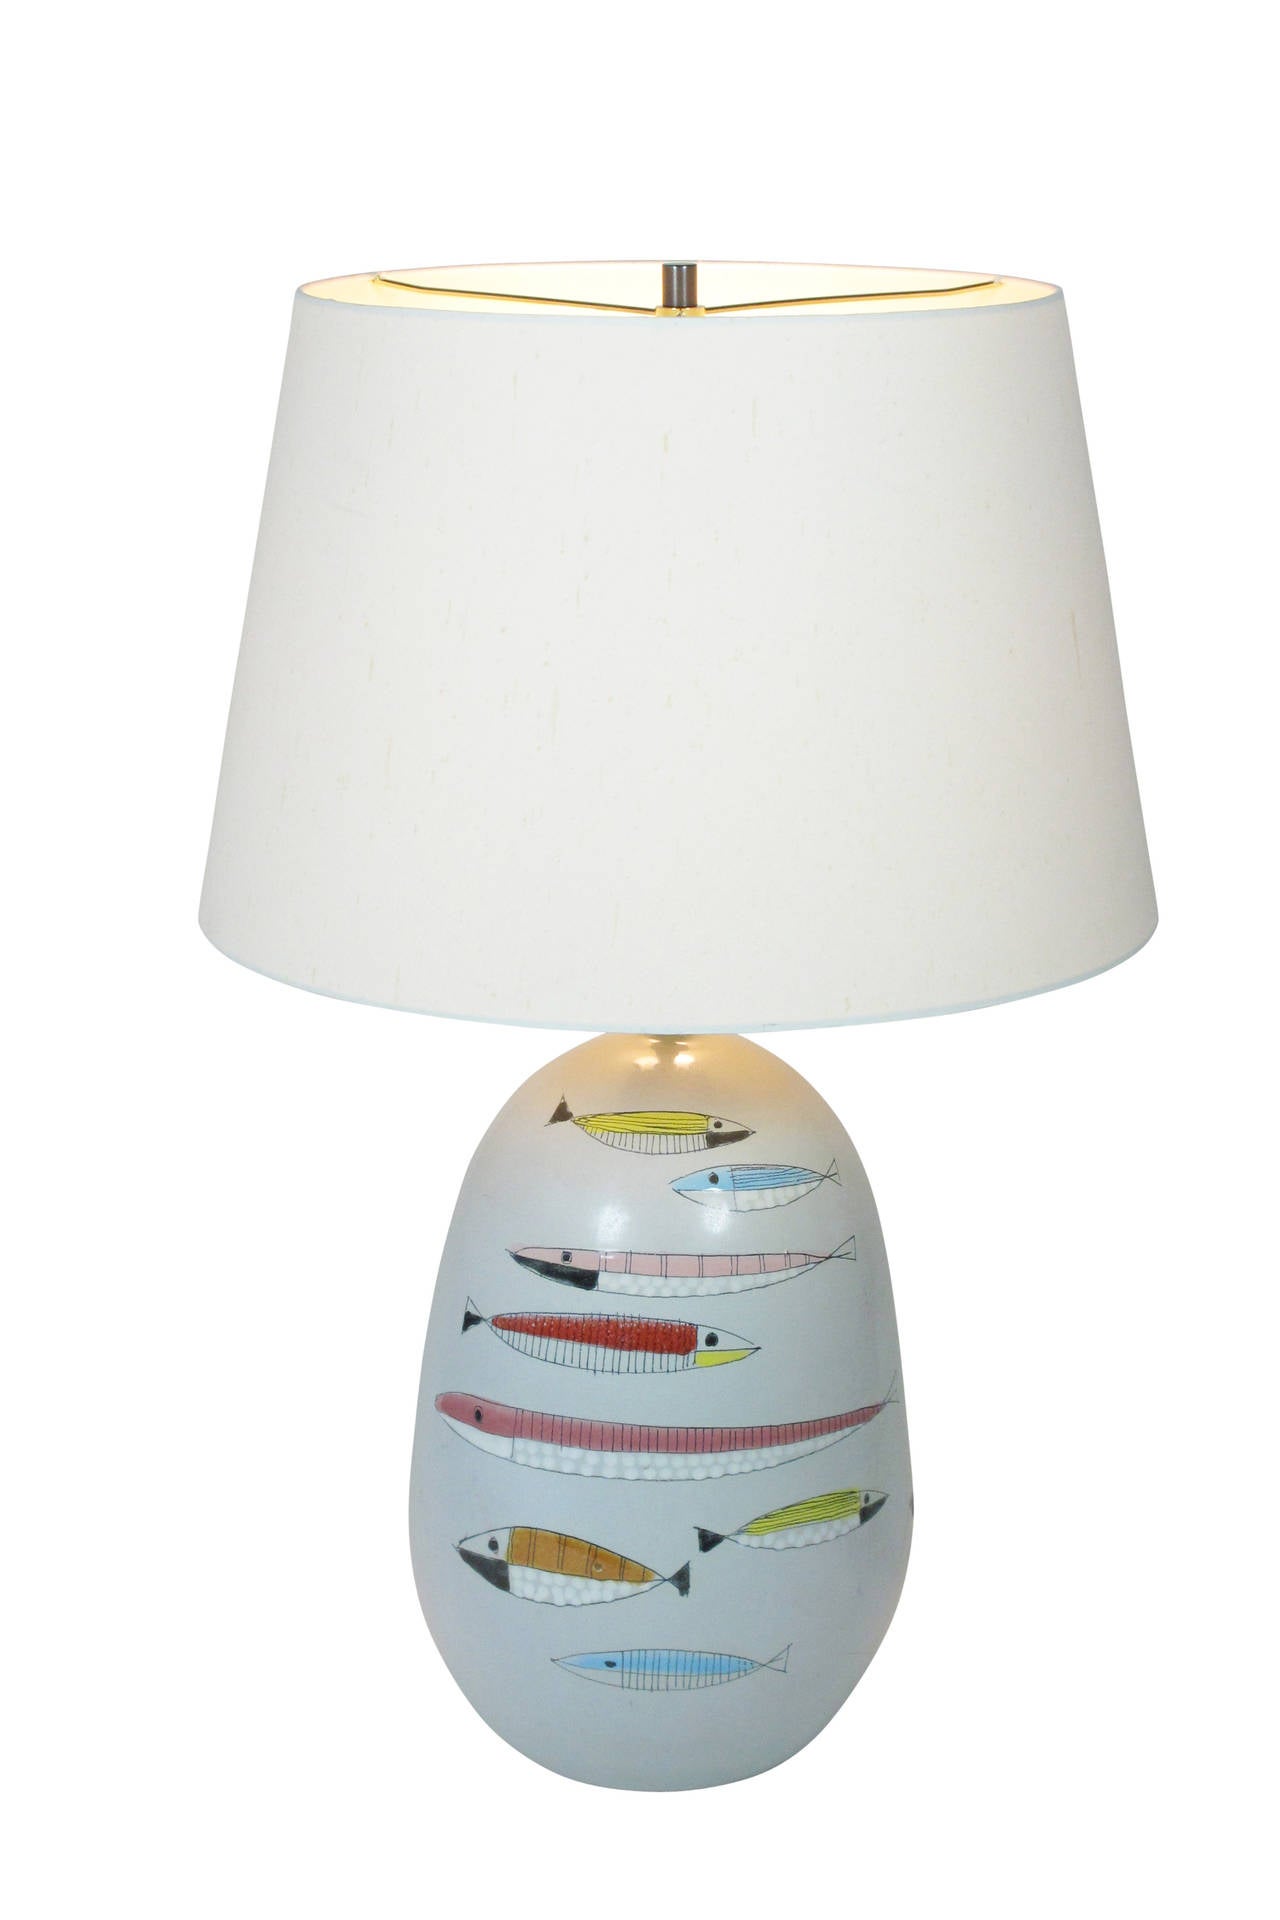 Colorfully decorated lamp with modernist fish over a pale grey glaze. Rewired with new bronzed double cluster for immediate use. Marked: B 46. Italy on bottom of ceramic. Ceramic only measures: 14.5 inches.